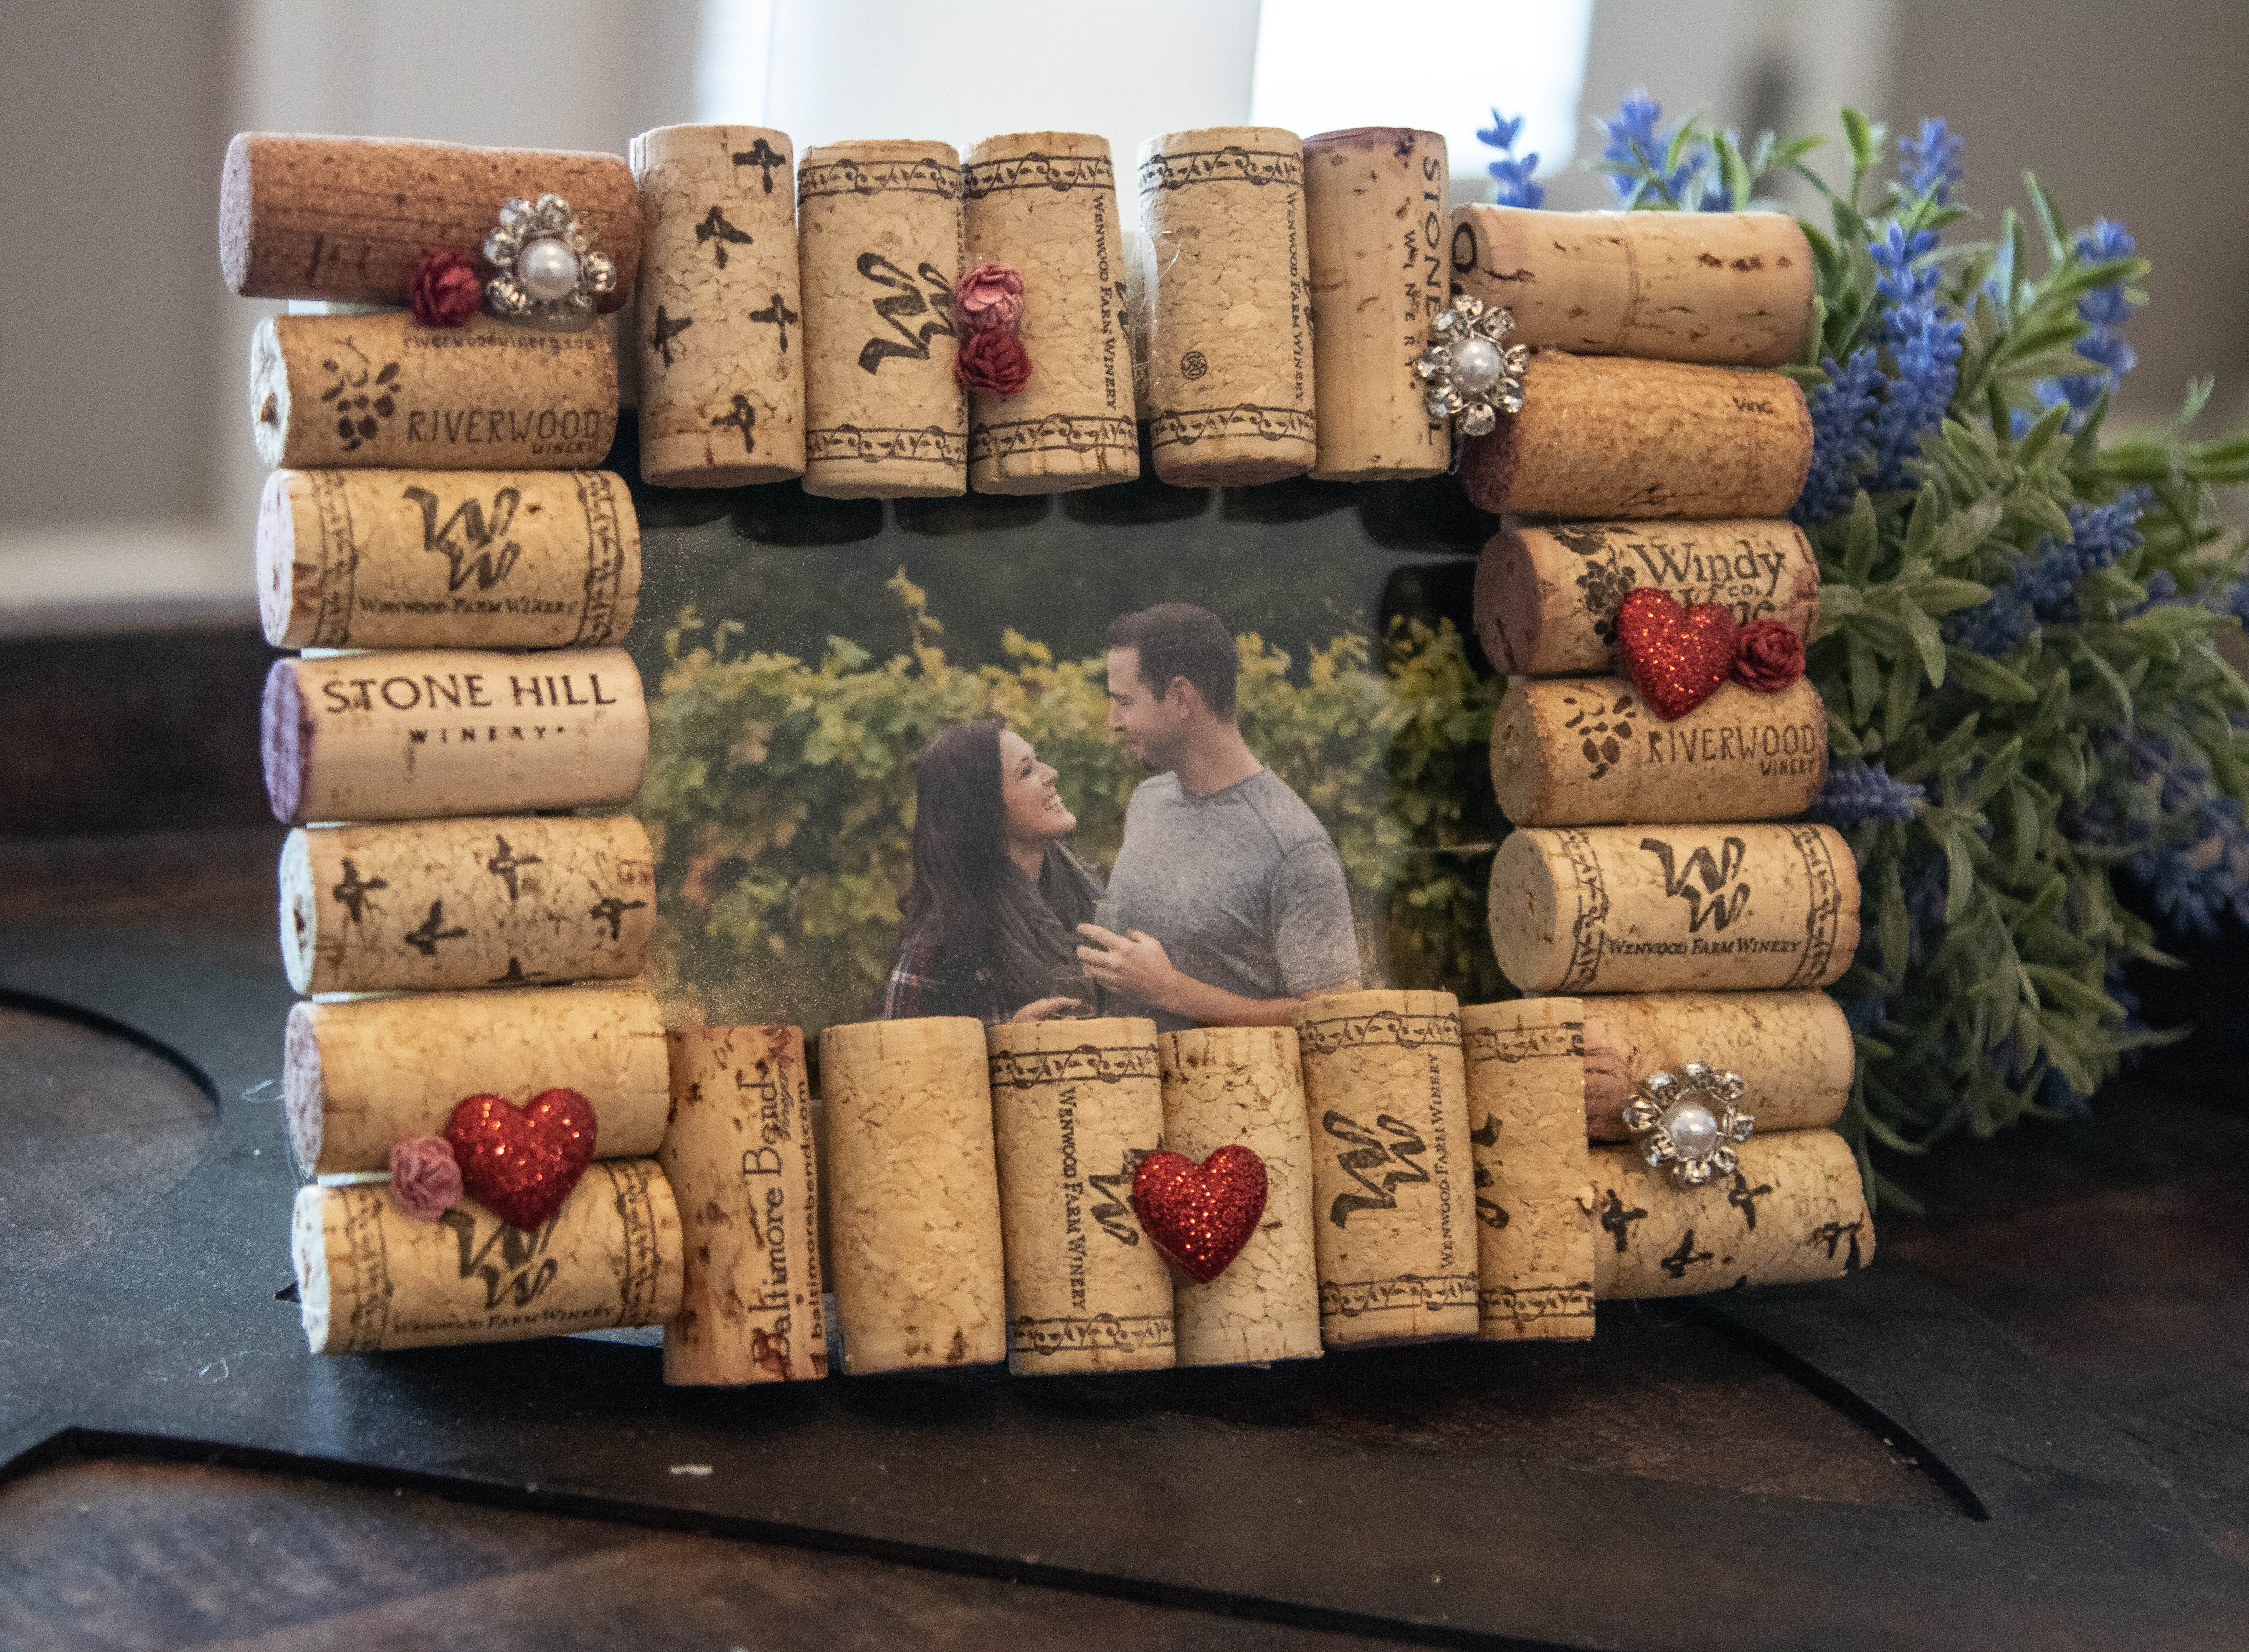 "Picture" Yourself with Missouri Wines in This DIY Cork Frame